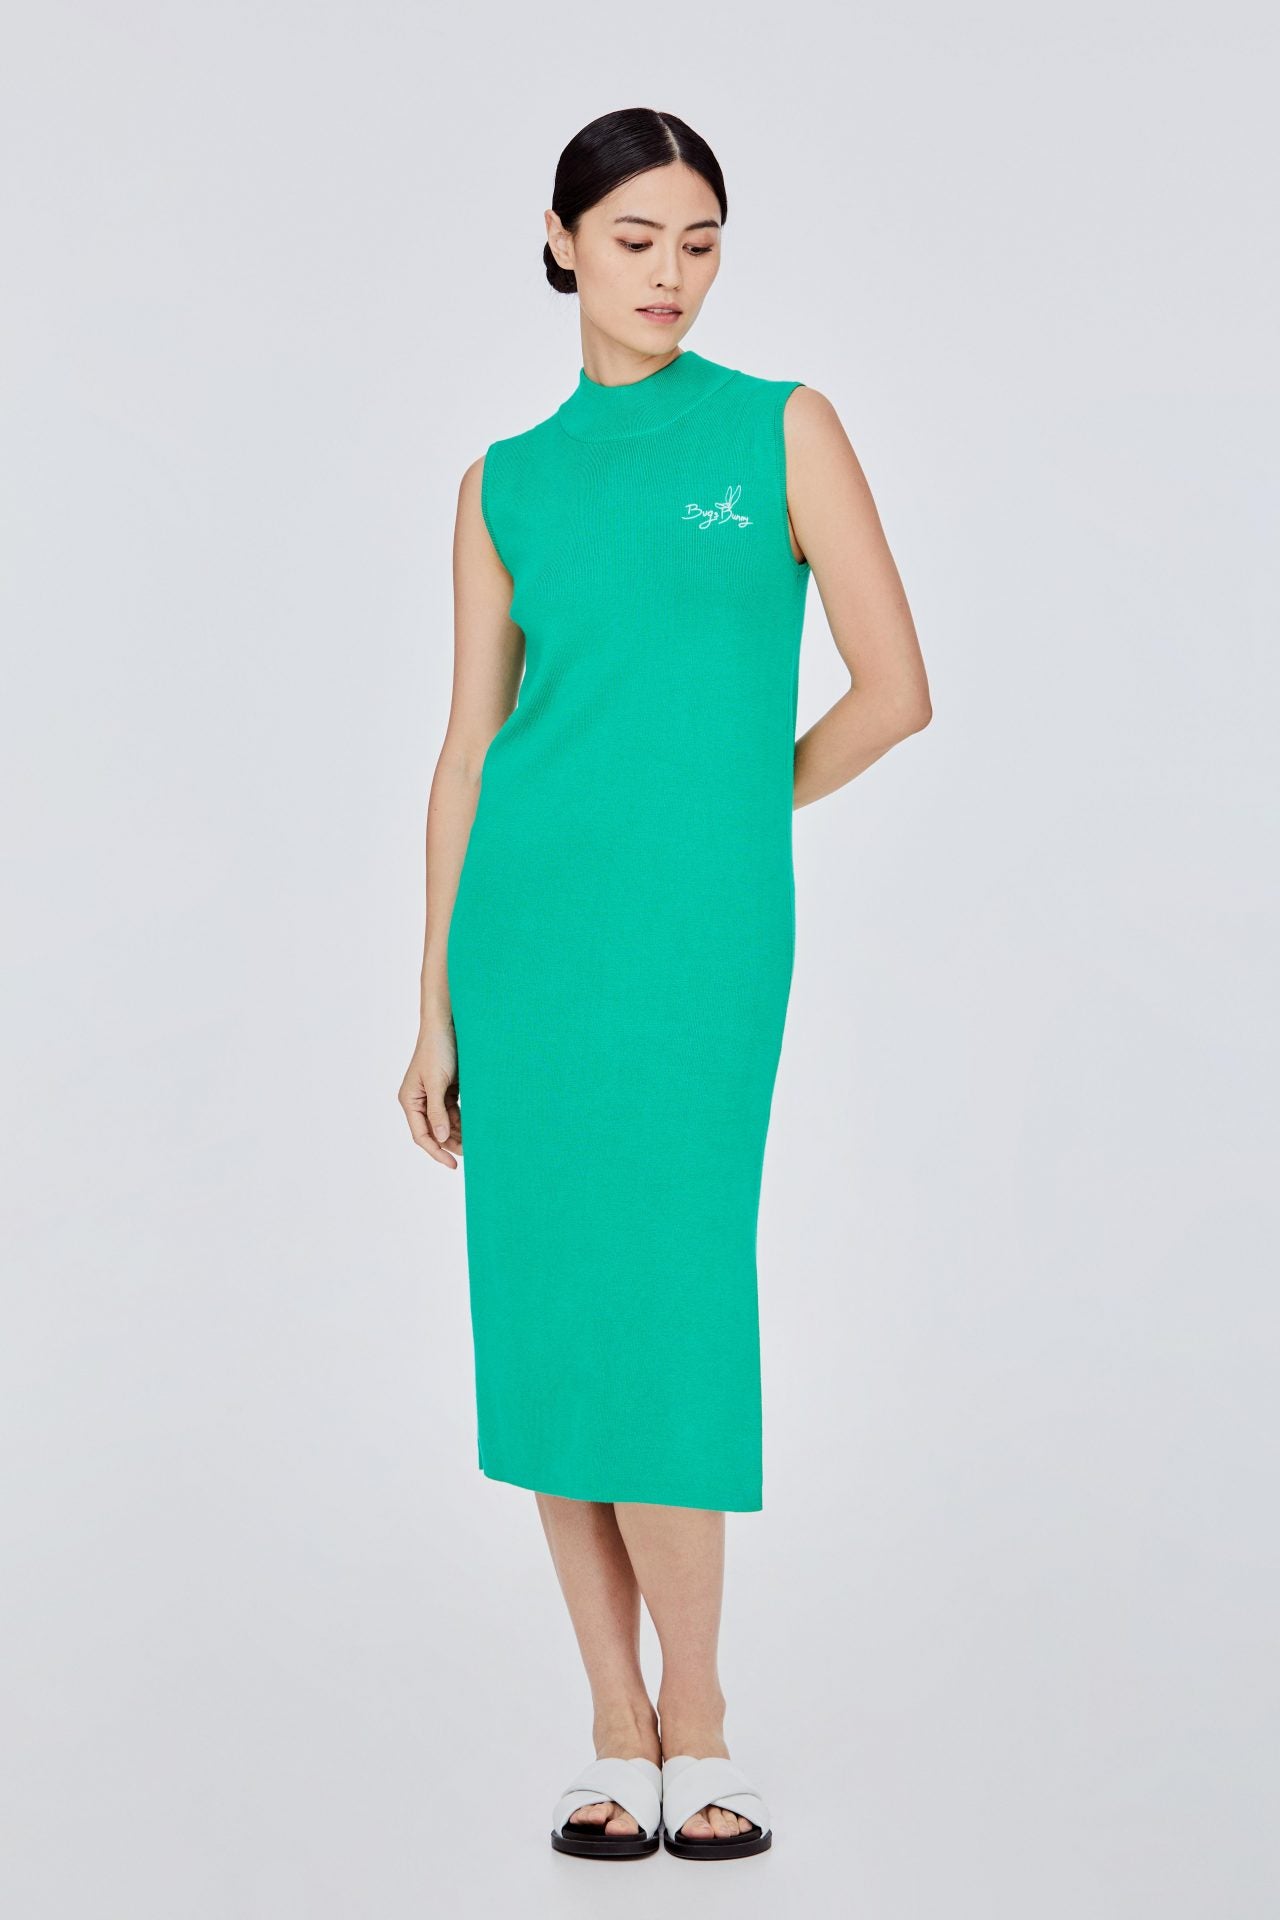 BKD 11620 EMBROIDERED LOGO HIGHNECK KNITTED BODYCON VERDE